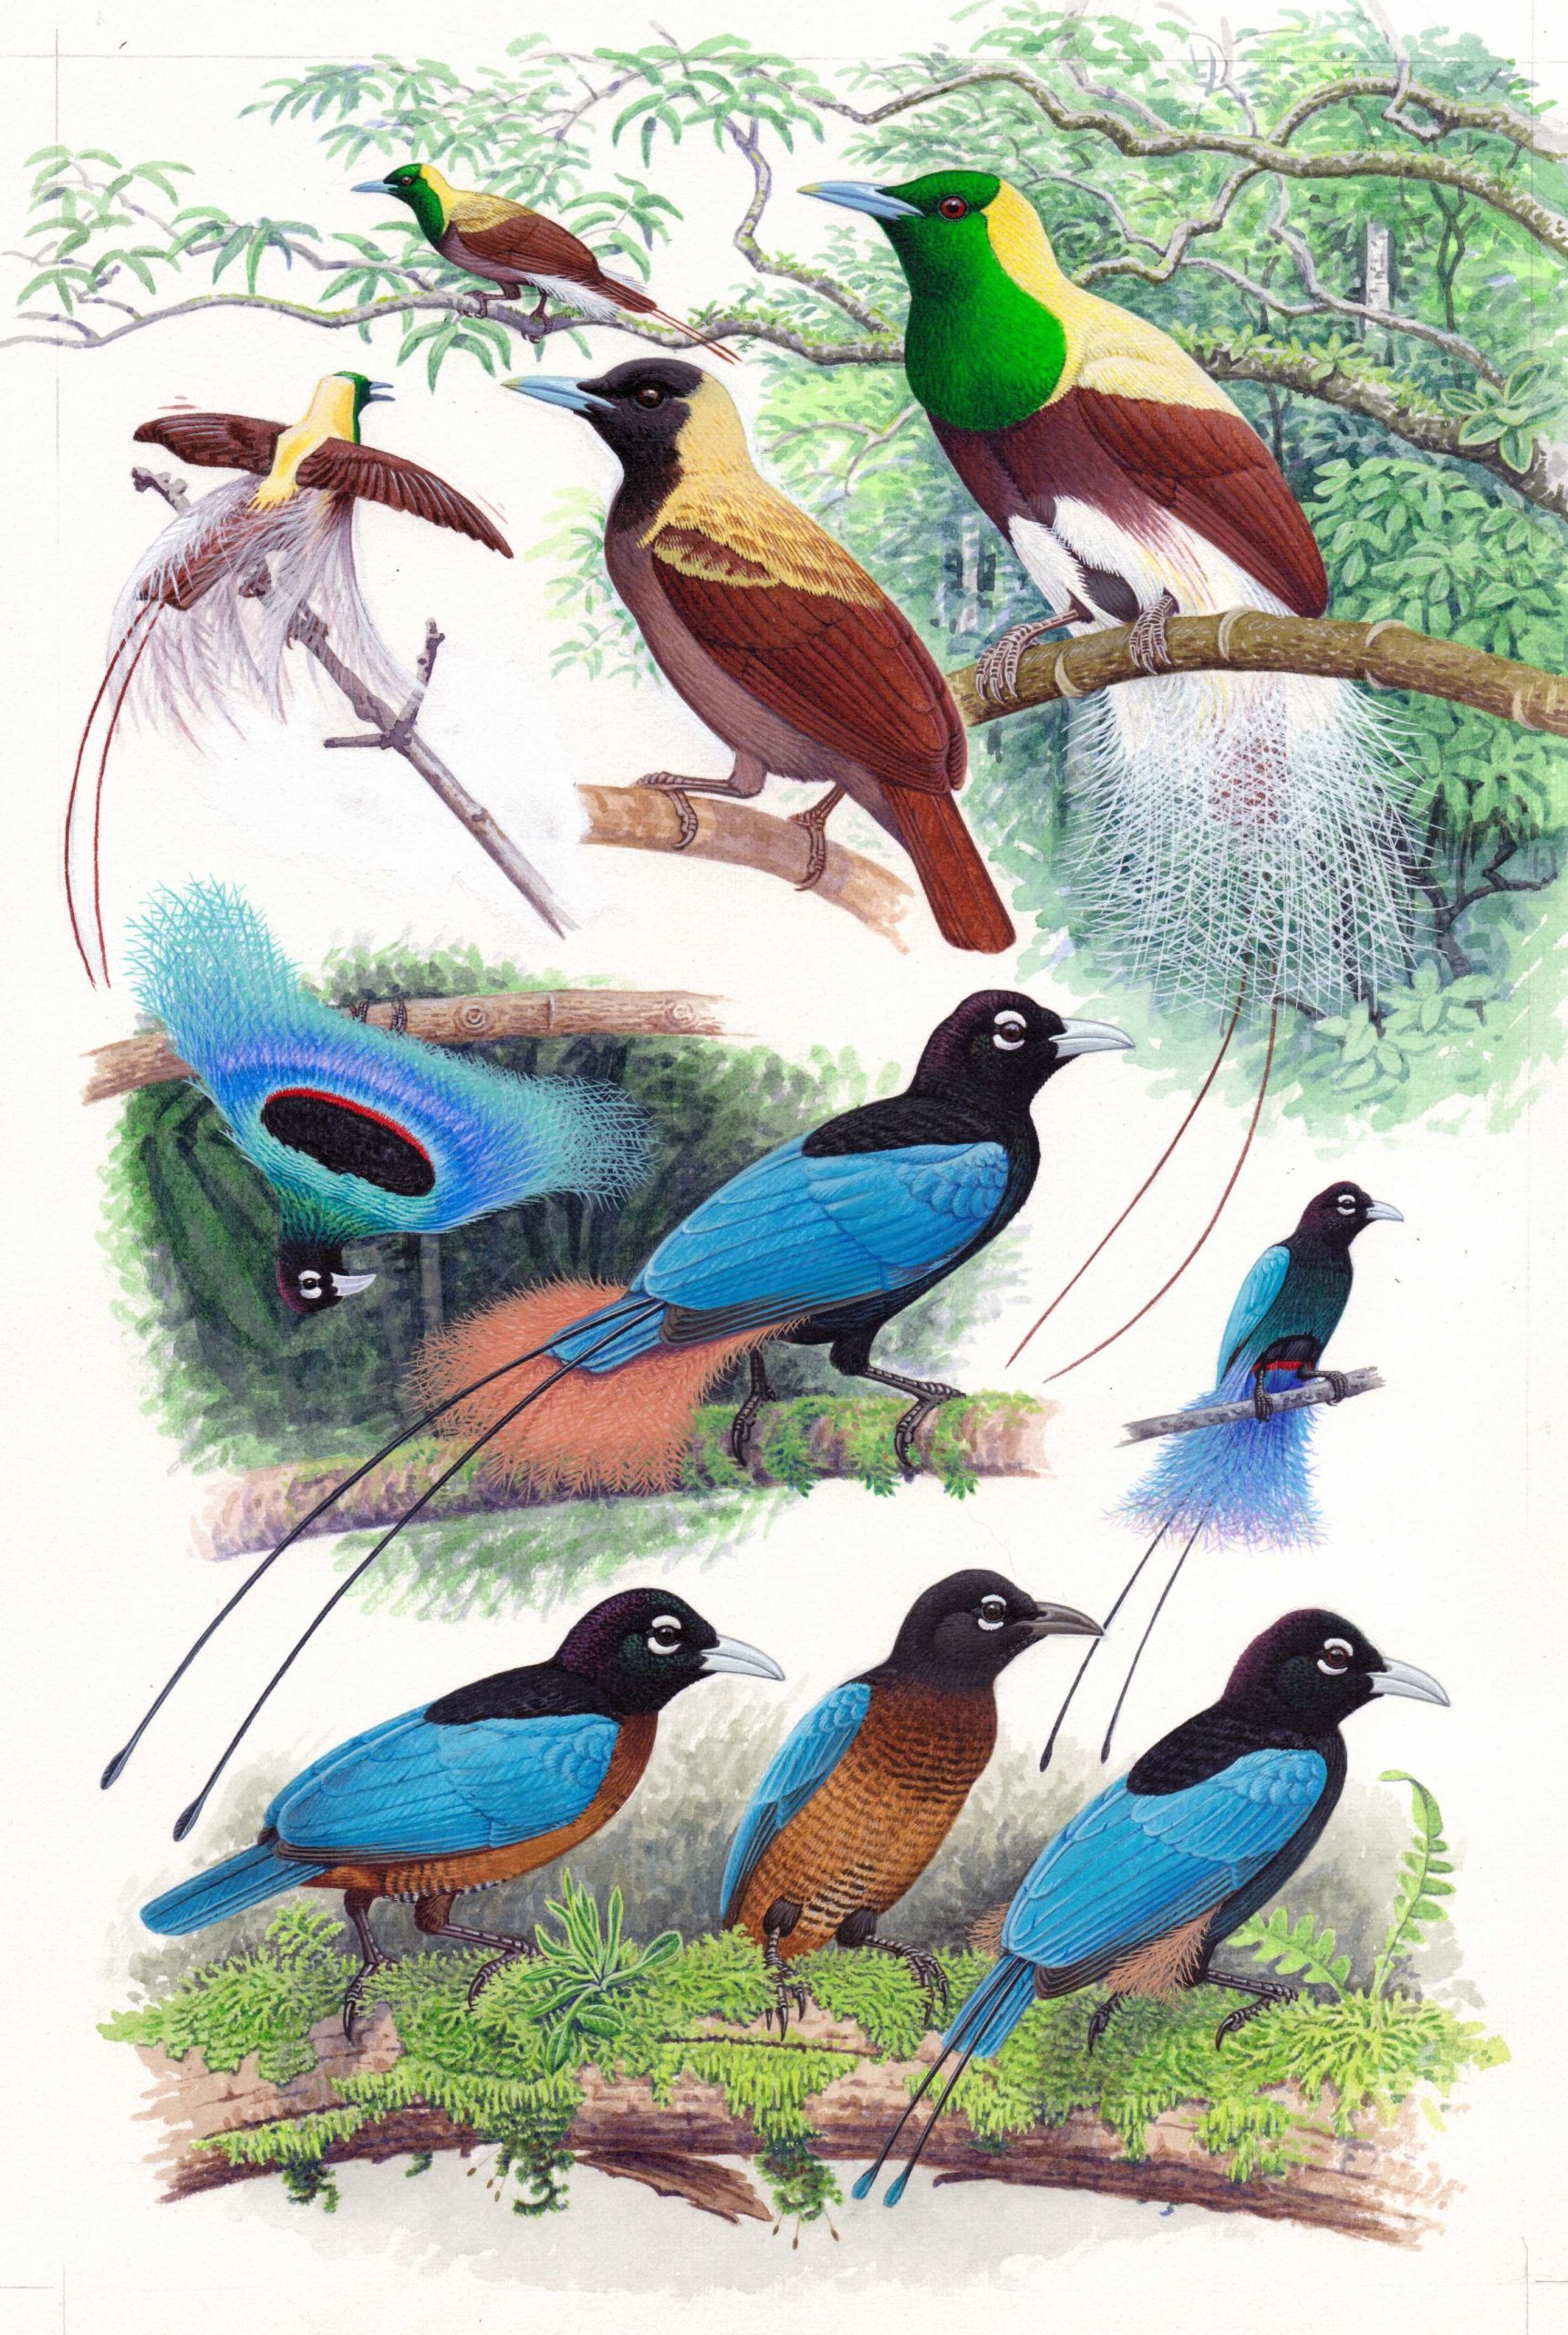 Emperor Bird of Paradise & Blue Bird of Paradise. Illustrations by ©Richard  Allen; Photgraphed by ©Sally Allen. All Rights Are Reserved. -  BirdCallsRadio™